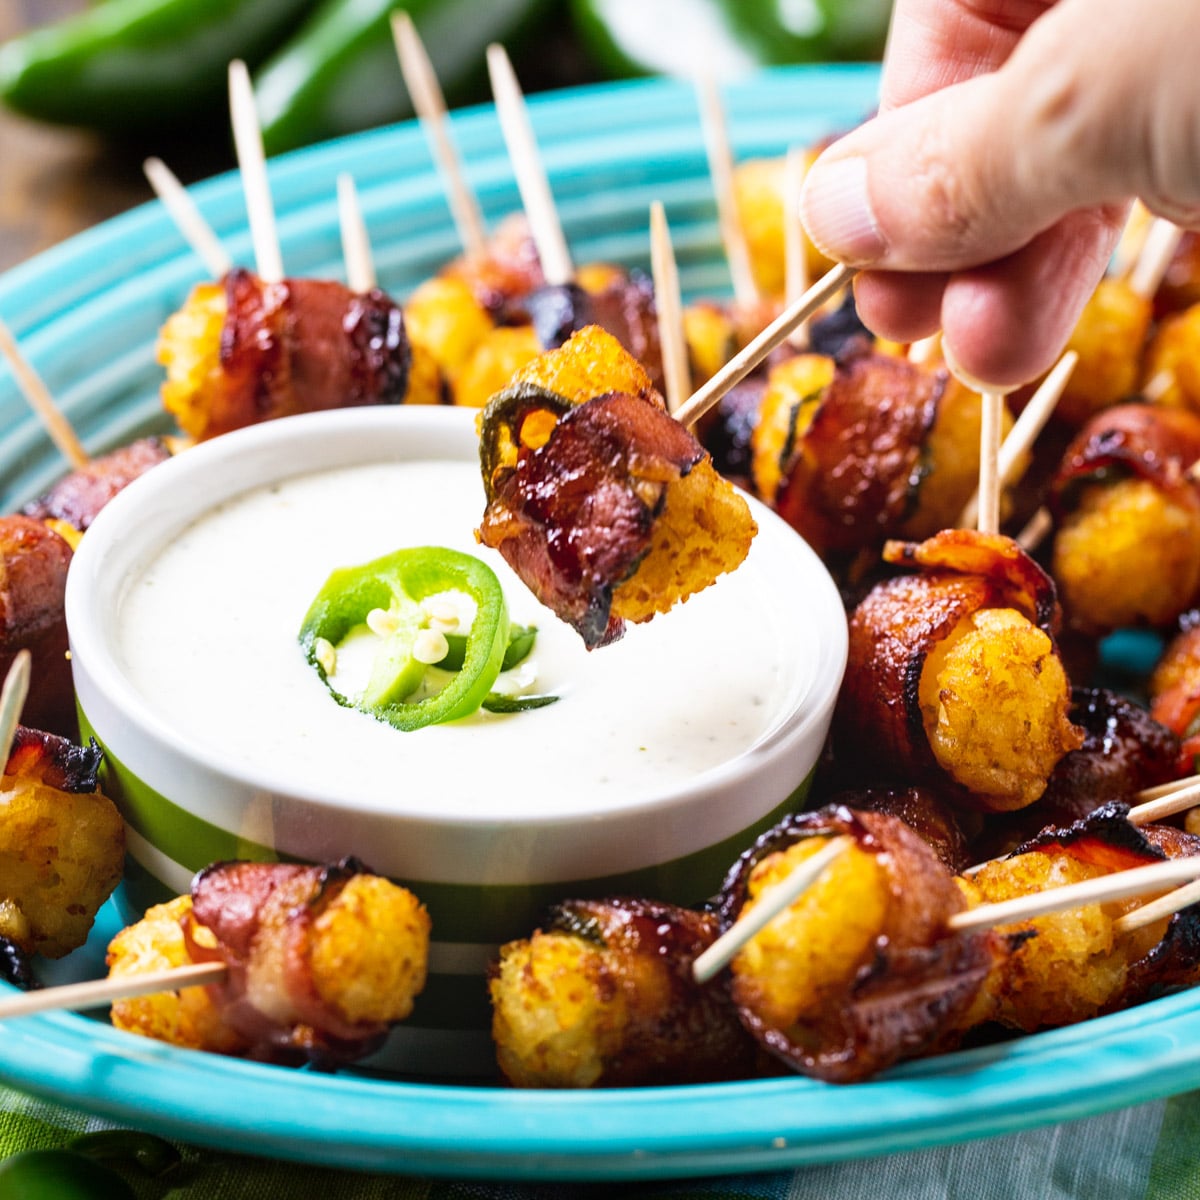 Jalapeno Bacon Tater Tot getting dipped in ranch dressing.